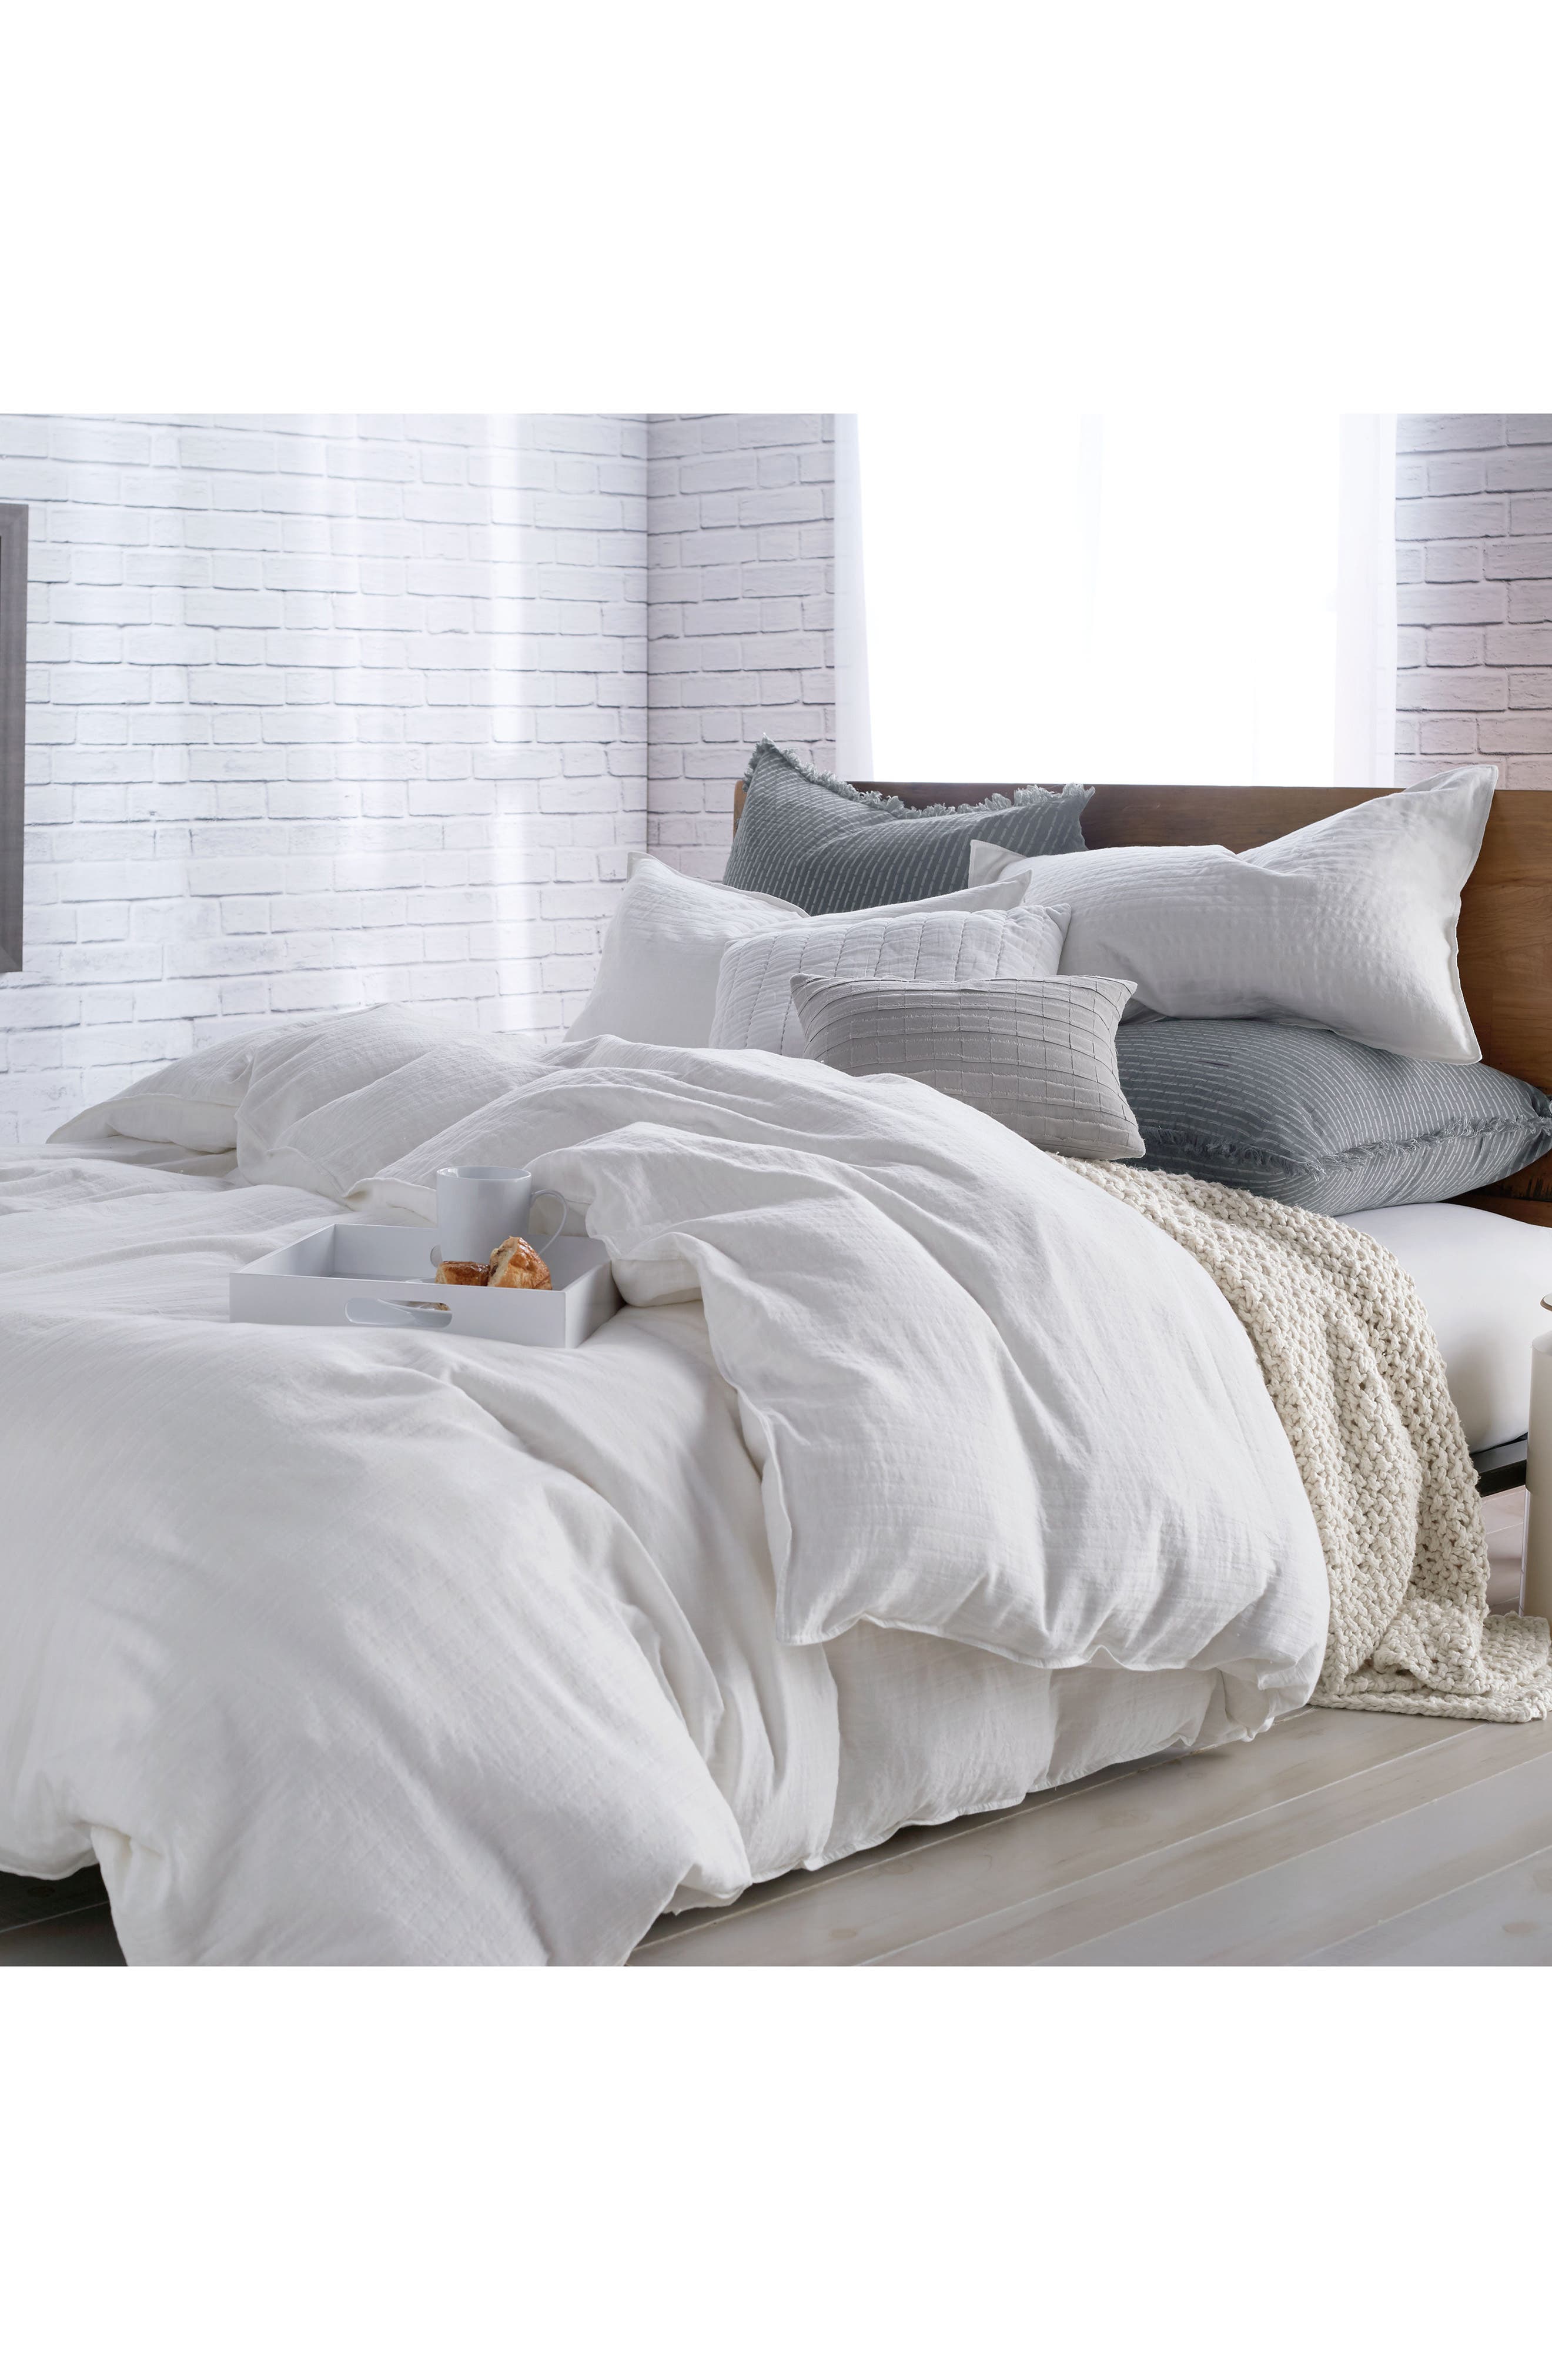 DKNY PURE Comfy White Duvet Cover at Nordstrom, Size King